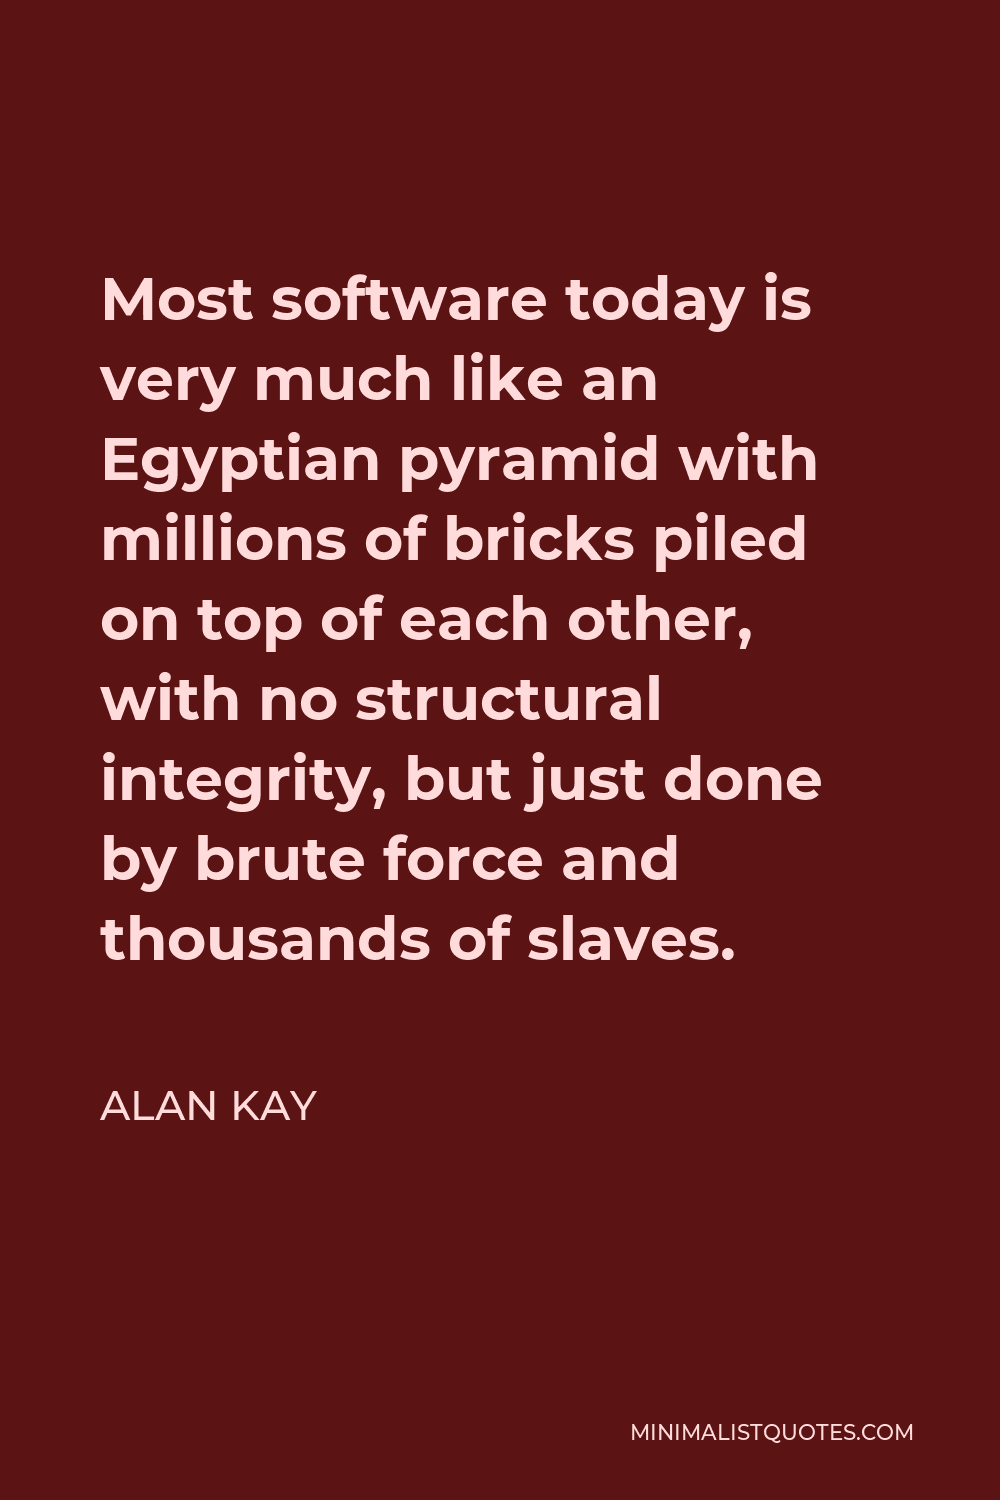 Alan Kay Quote - Most software today is very much like an Egyptian pyramid with millions of bricks piled on top of each other, with no structural integrity, but just done by brute force and thousands of slaves.